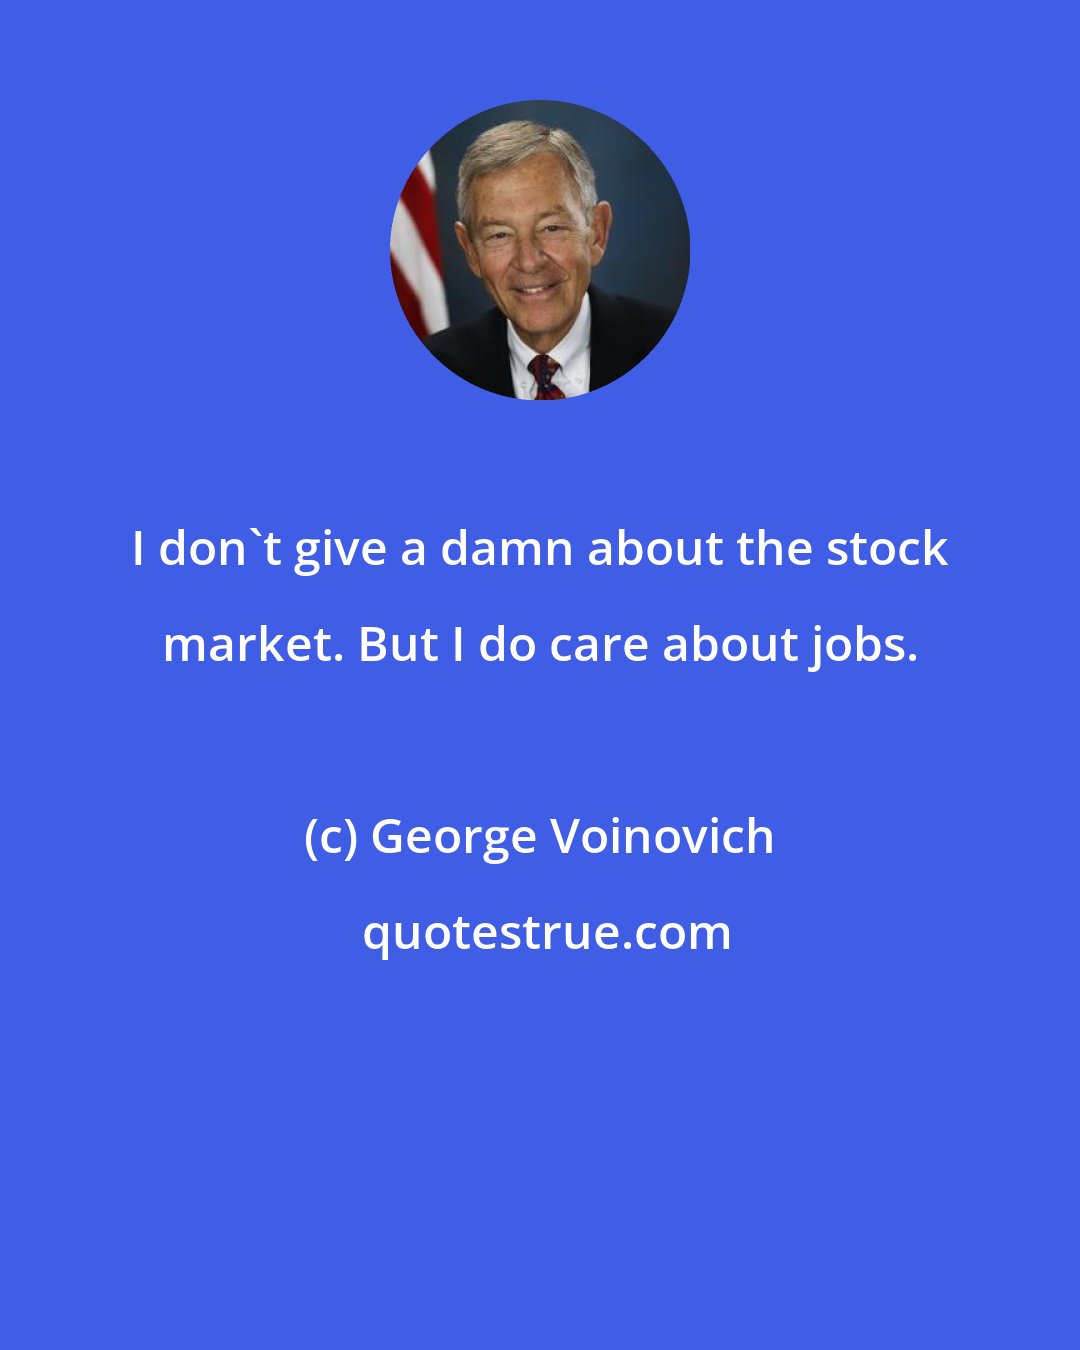 George Voinovich: I don't give a damn about the stock market. But I do care about jobs.